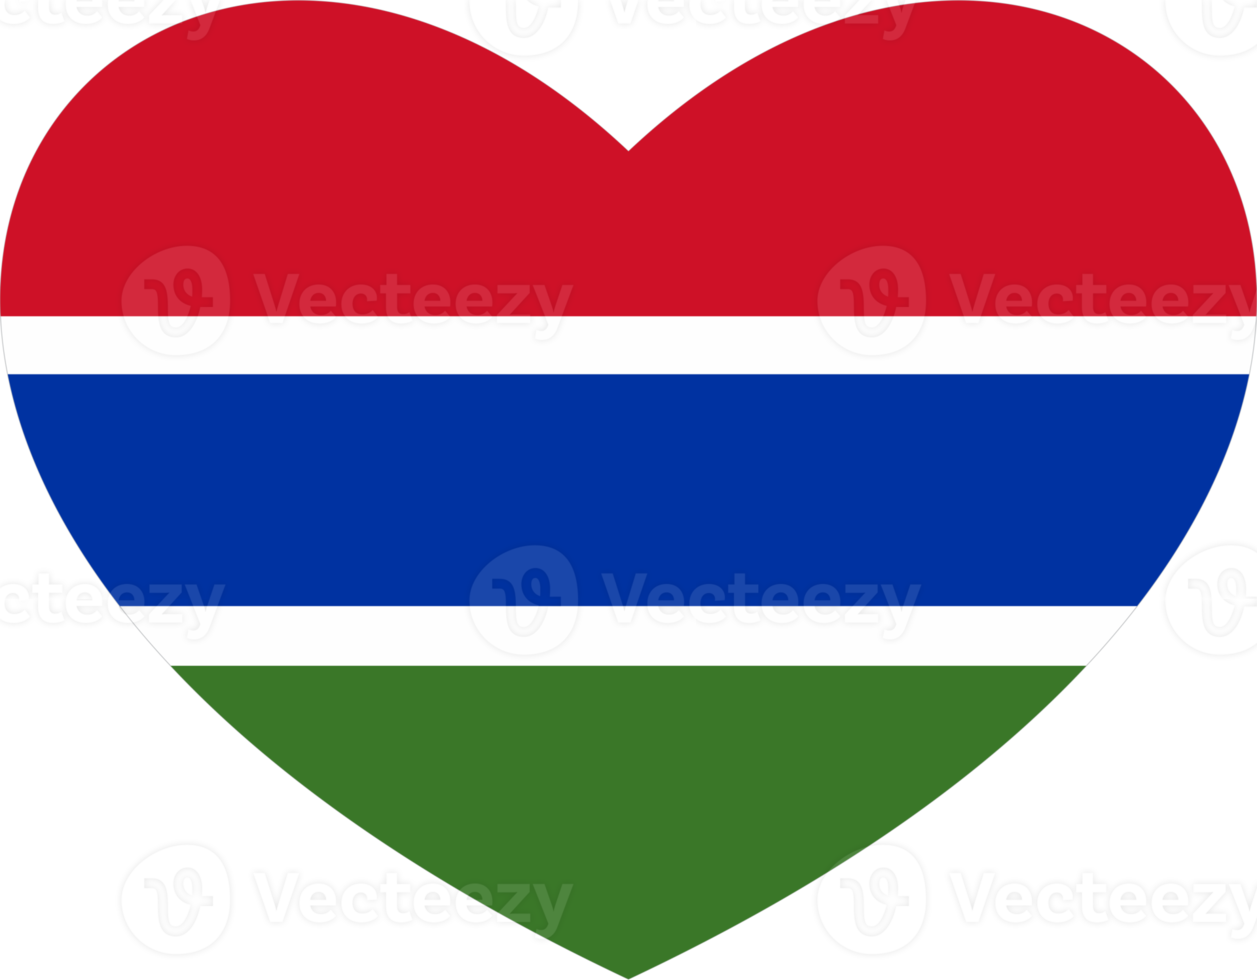 Gambia bandiera cuore forma png